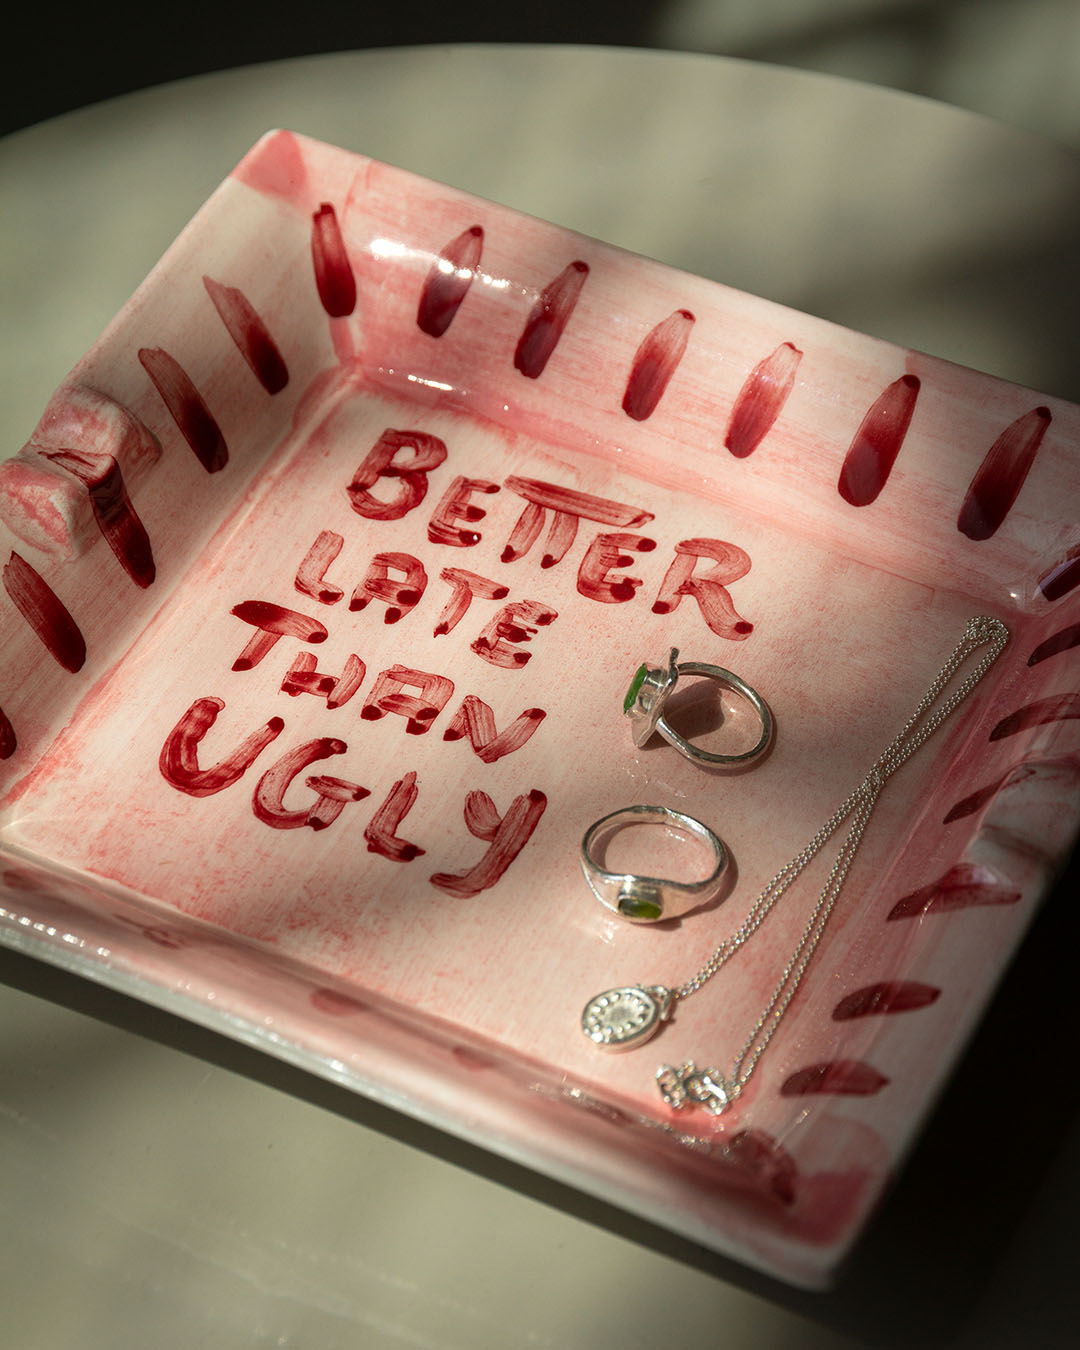 Cendrier / vide poche "Better Late than Ugly"